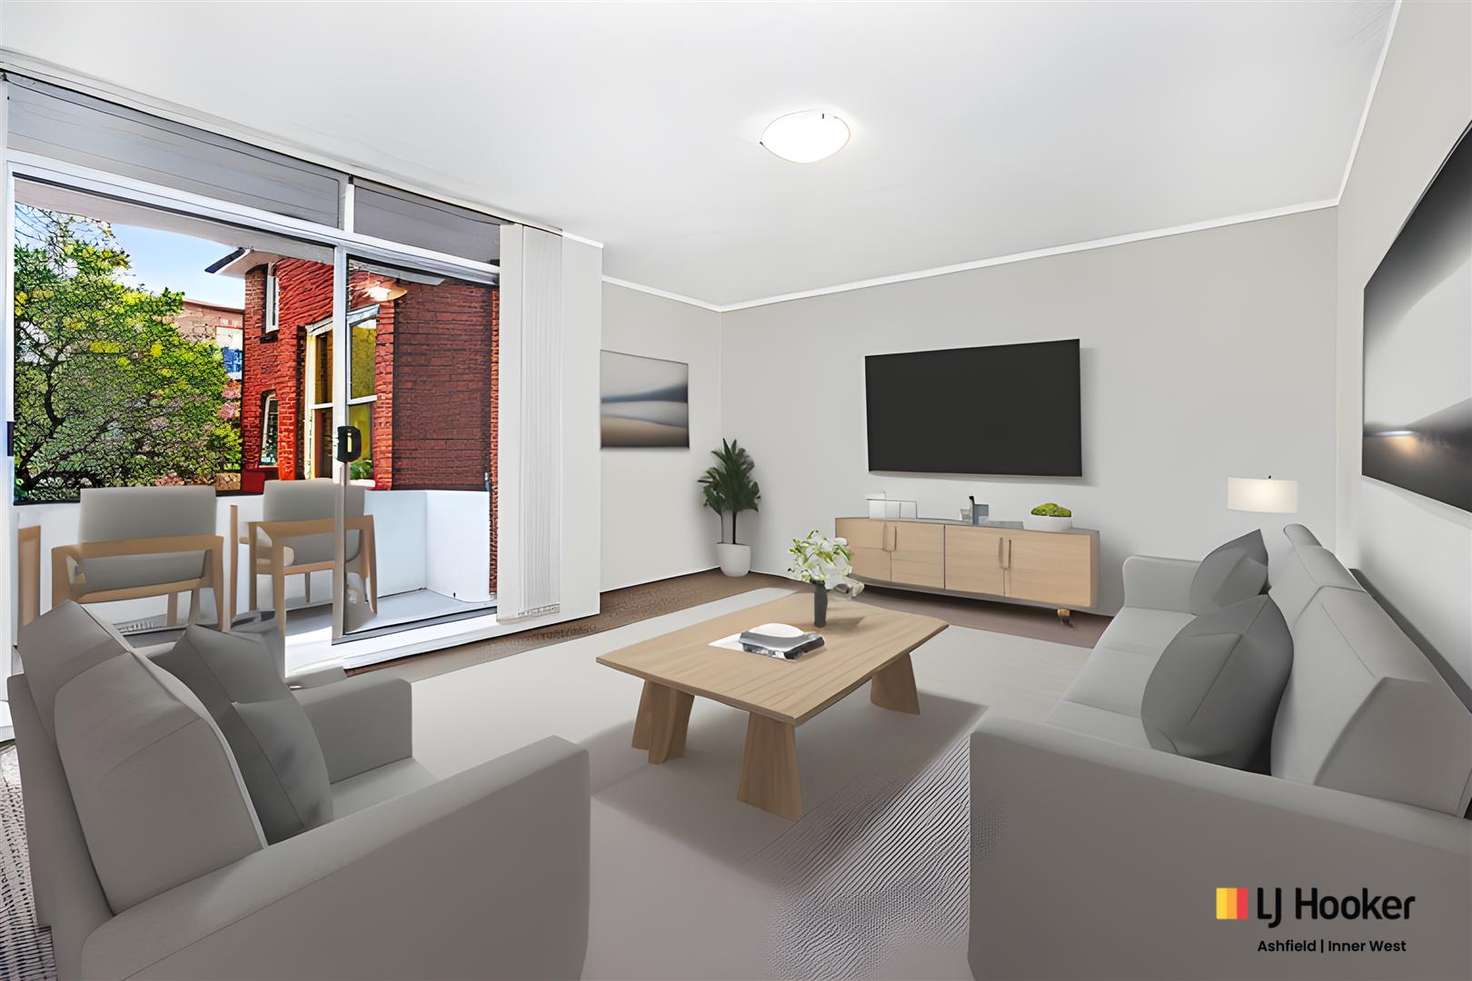 Main view of Homely apartment listing, 10/3 Chandos Street, Ashfield NSW 2131